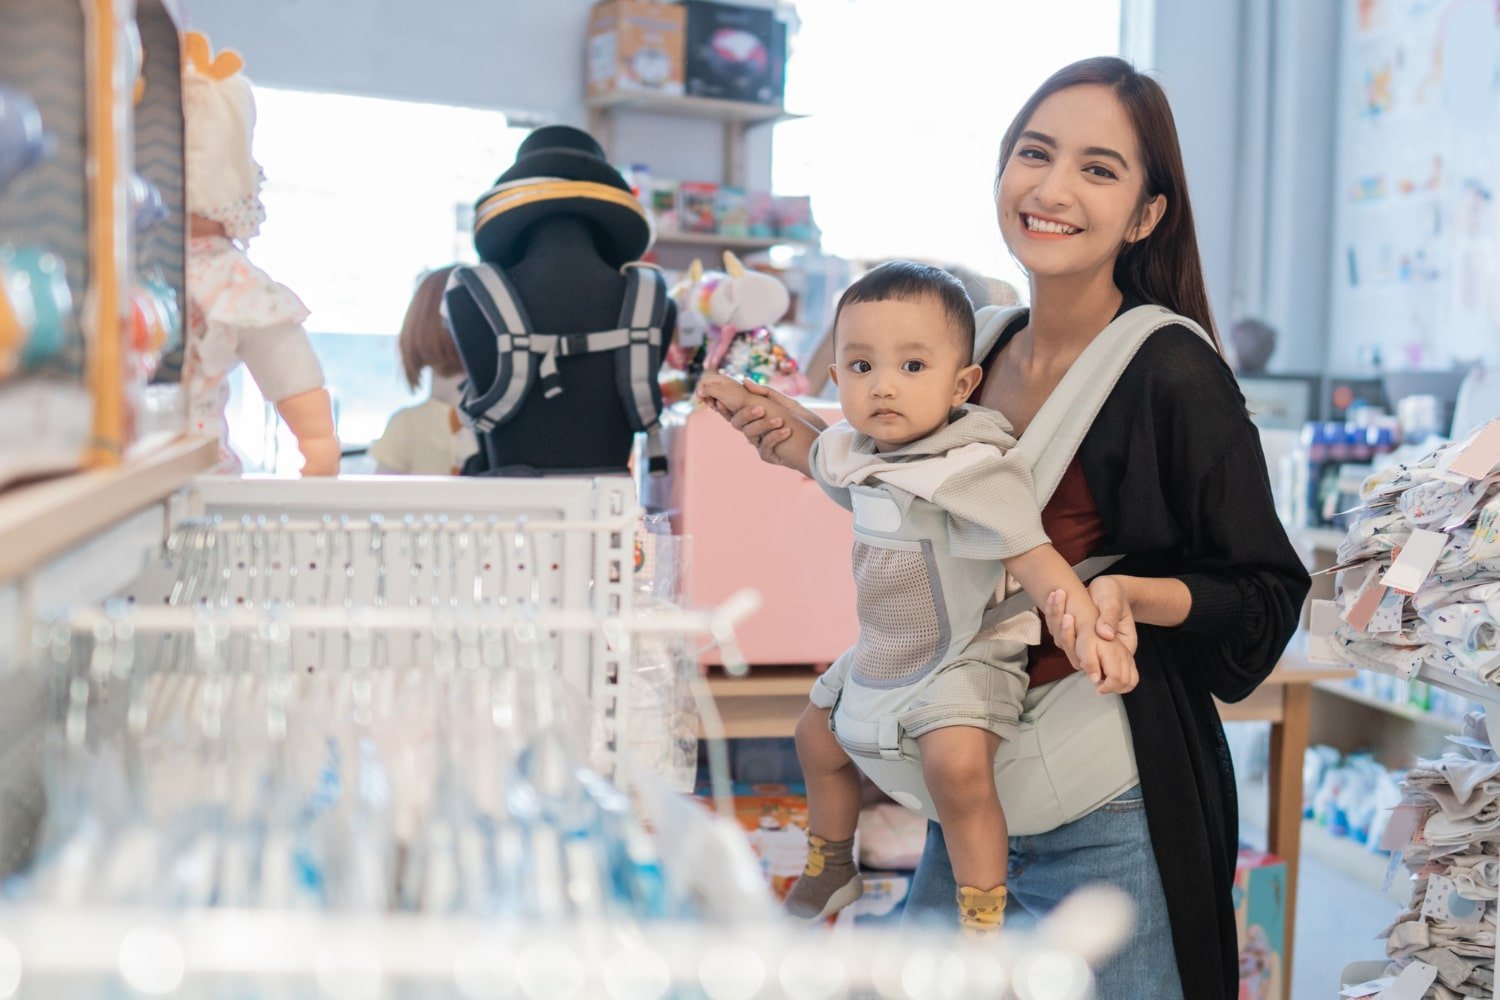 Shop For Baby Products At Aubert’s Comprehensive Baby Store